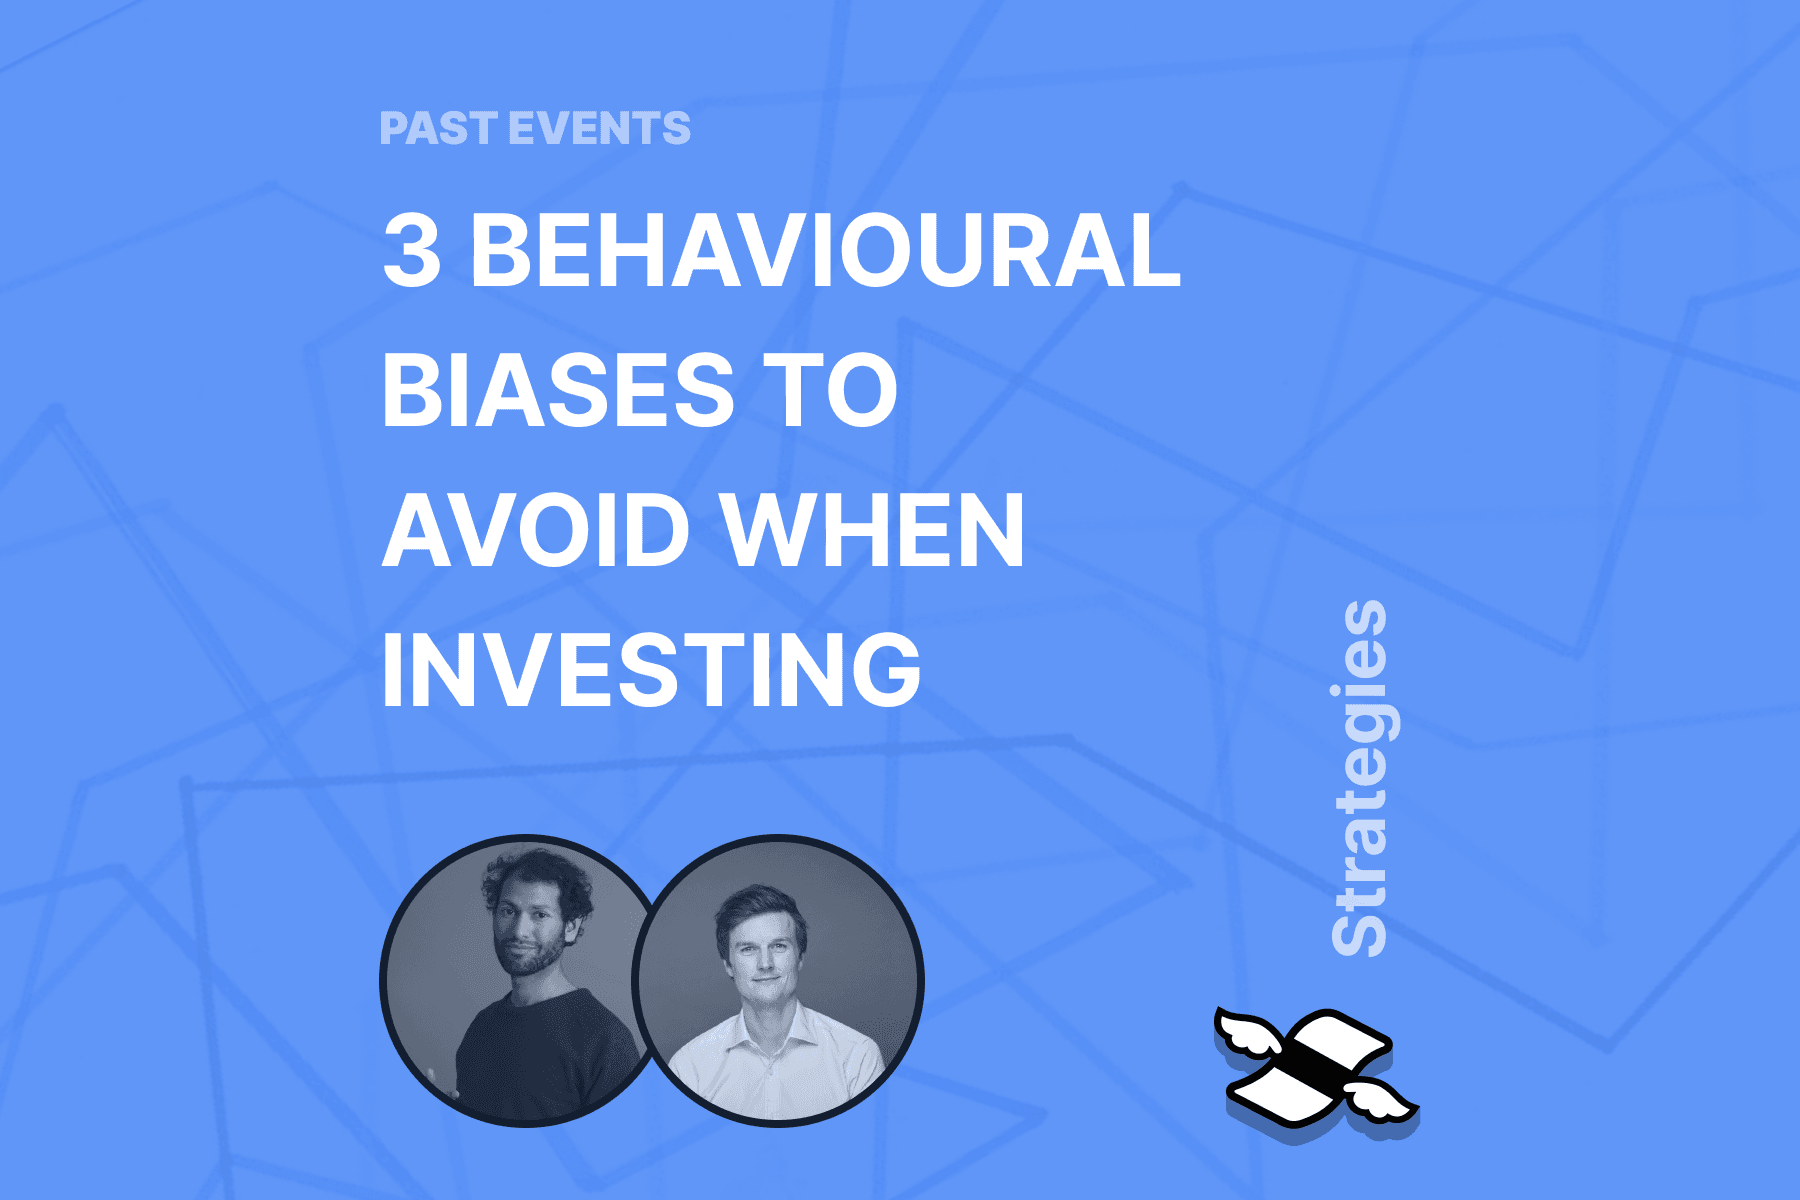 3 Behavioural Biases To Avoid When Investing